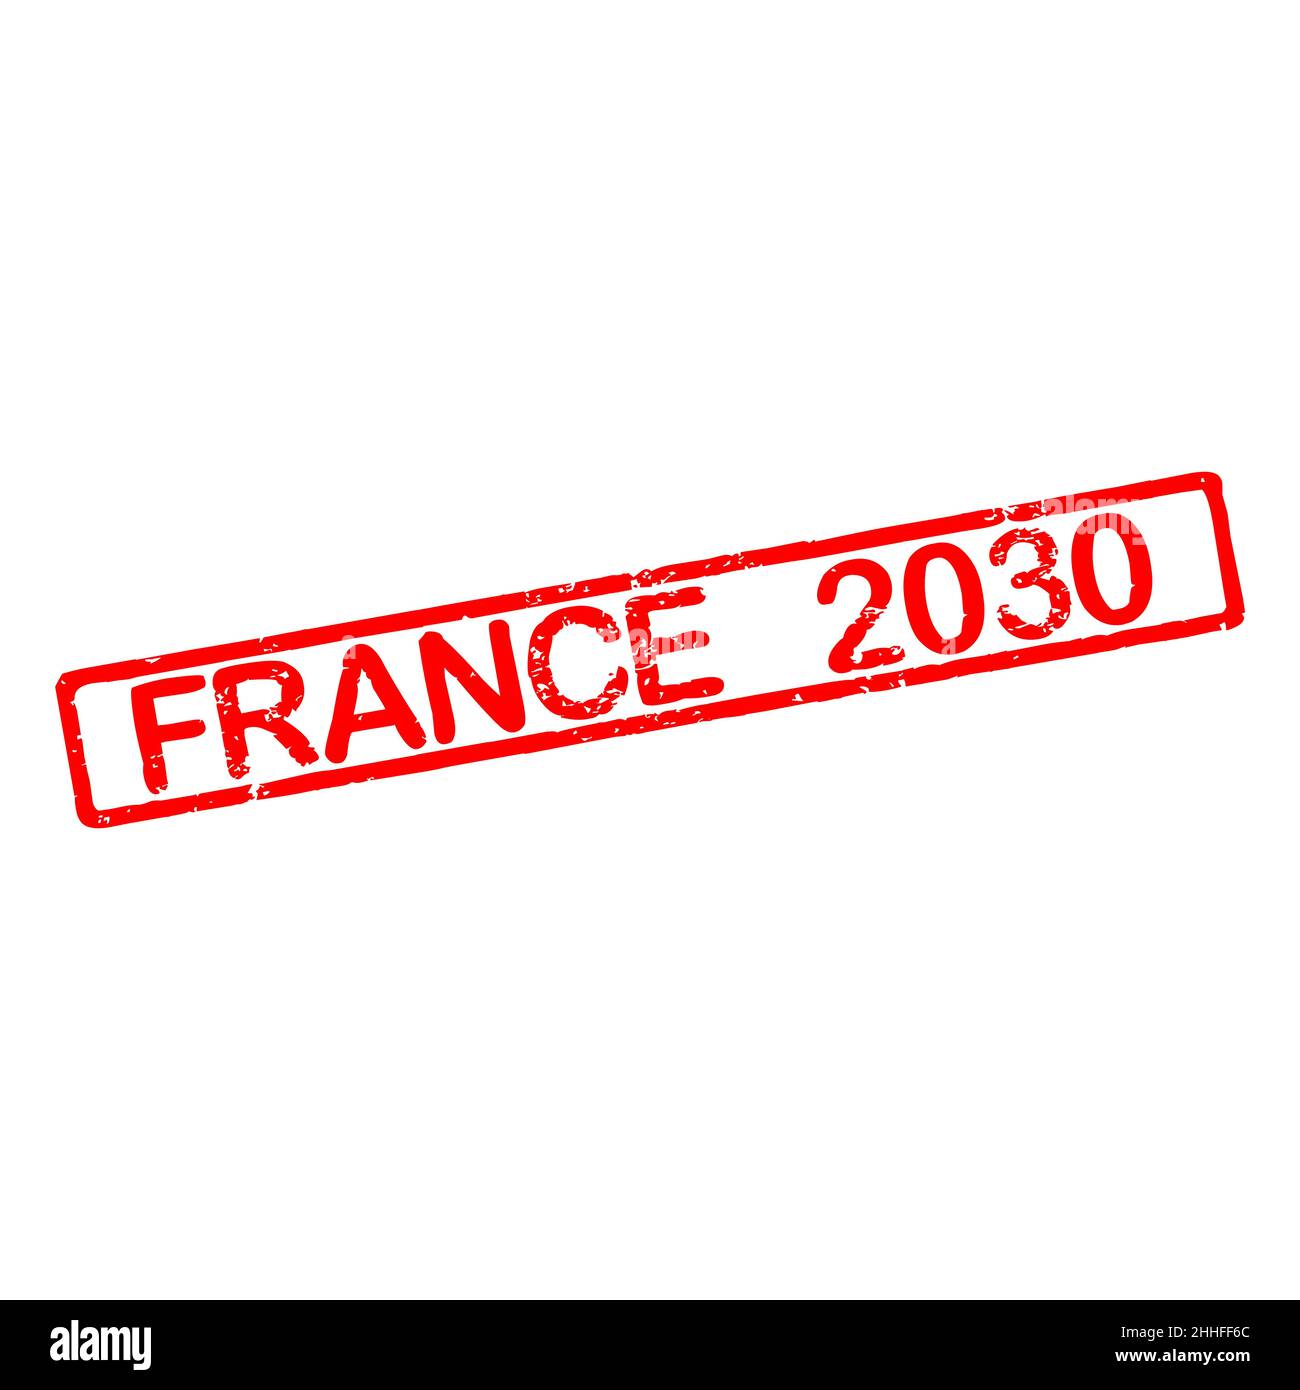 Rubber stamp with text France 2030 Stock Photo